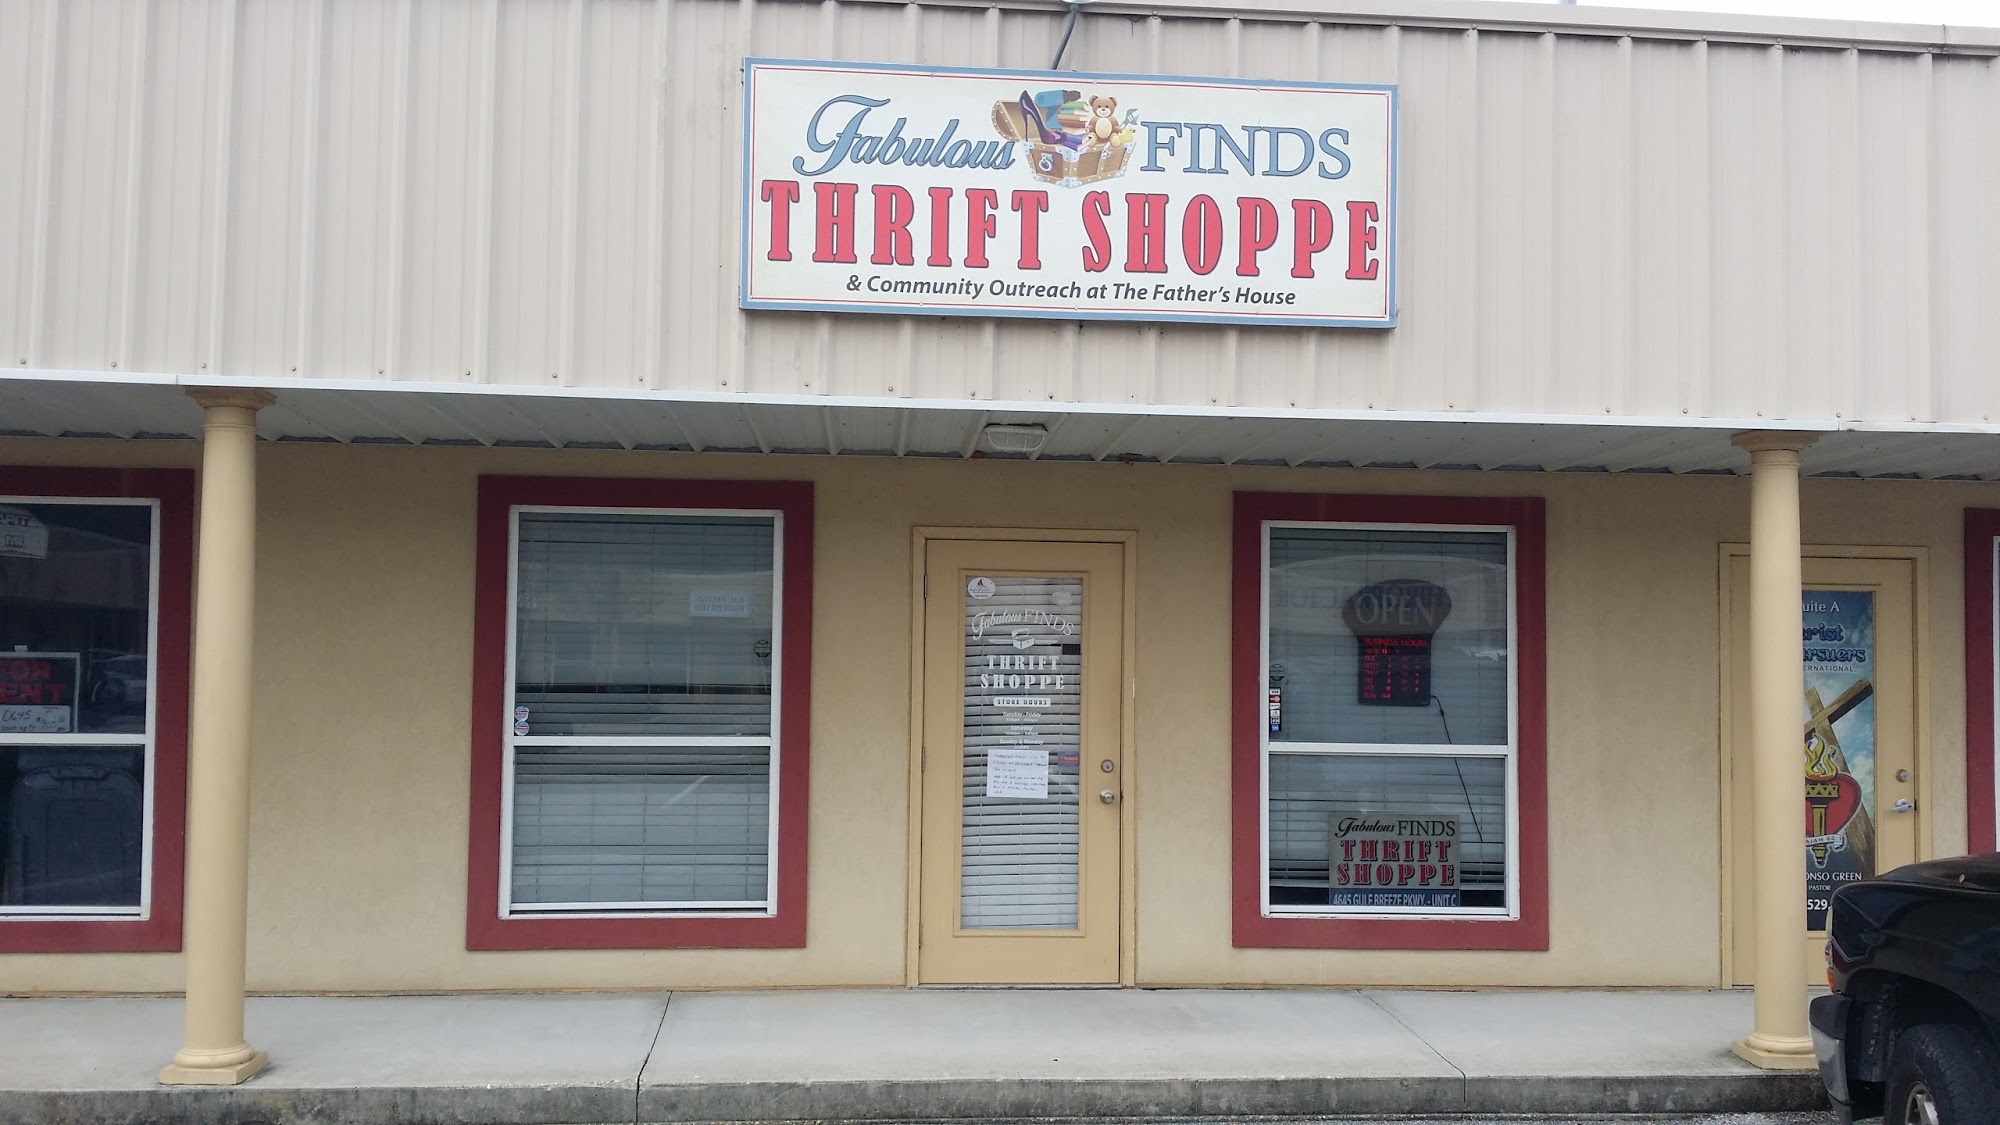 Fabulous Finds Thrift Shoppe and Community Outreach Inc